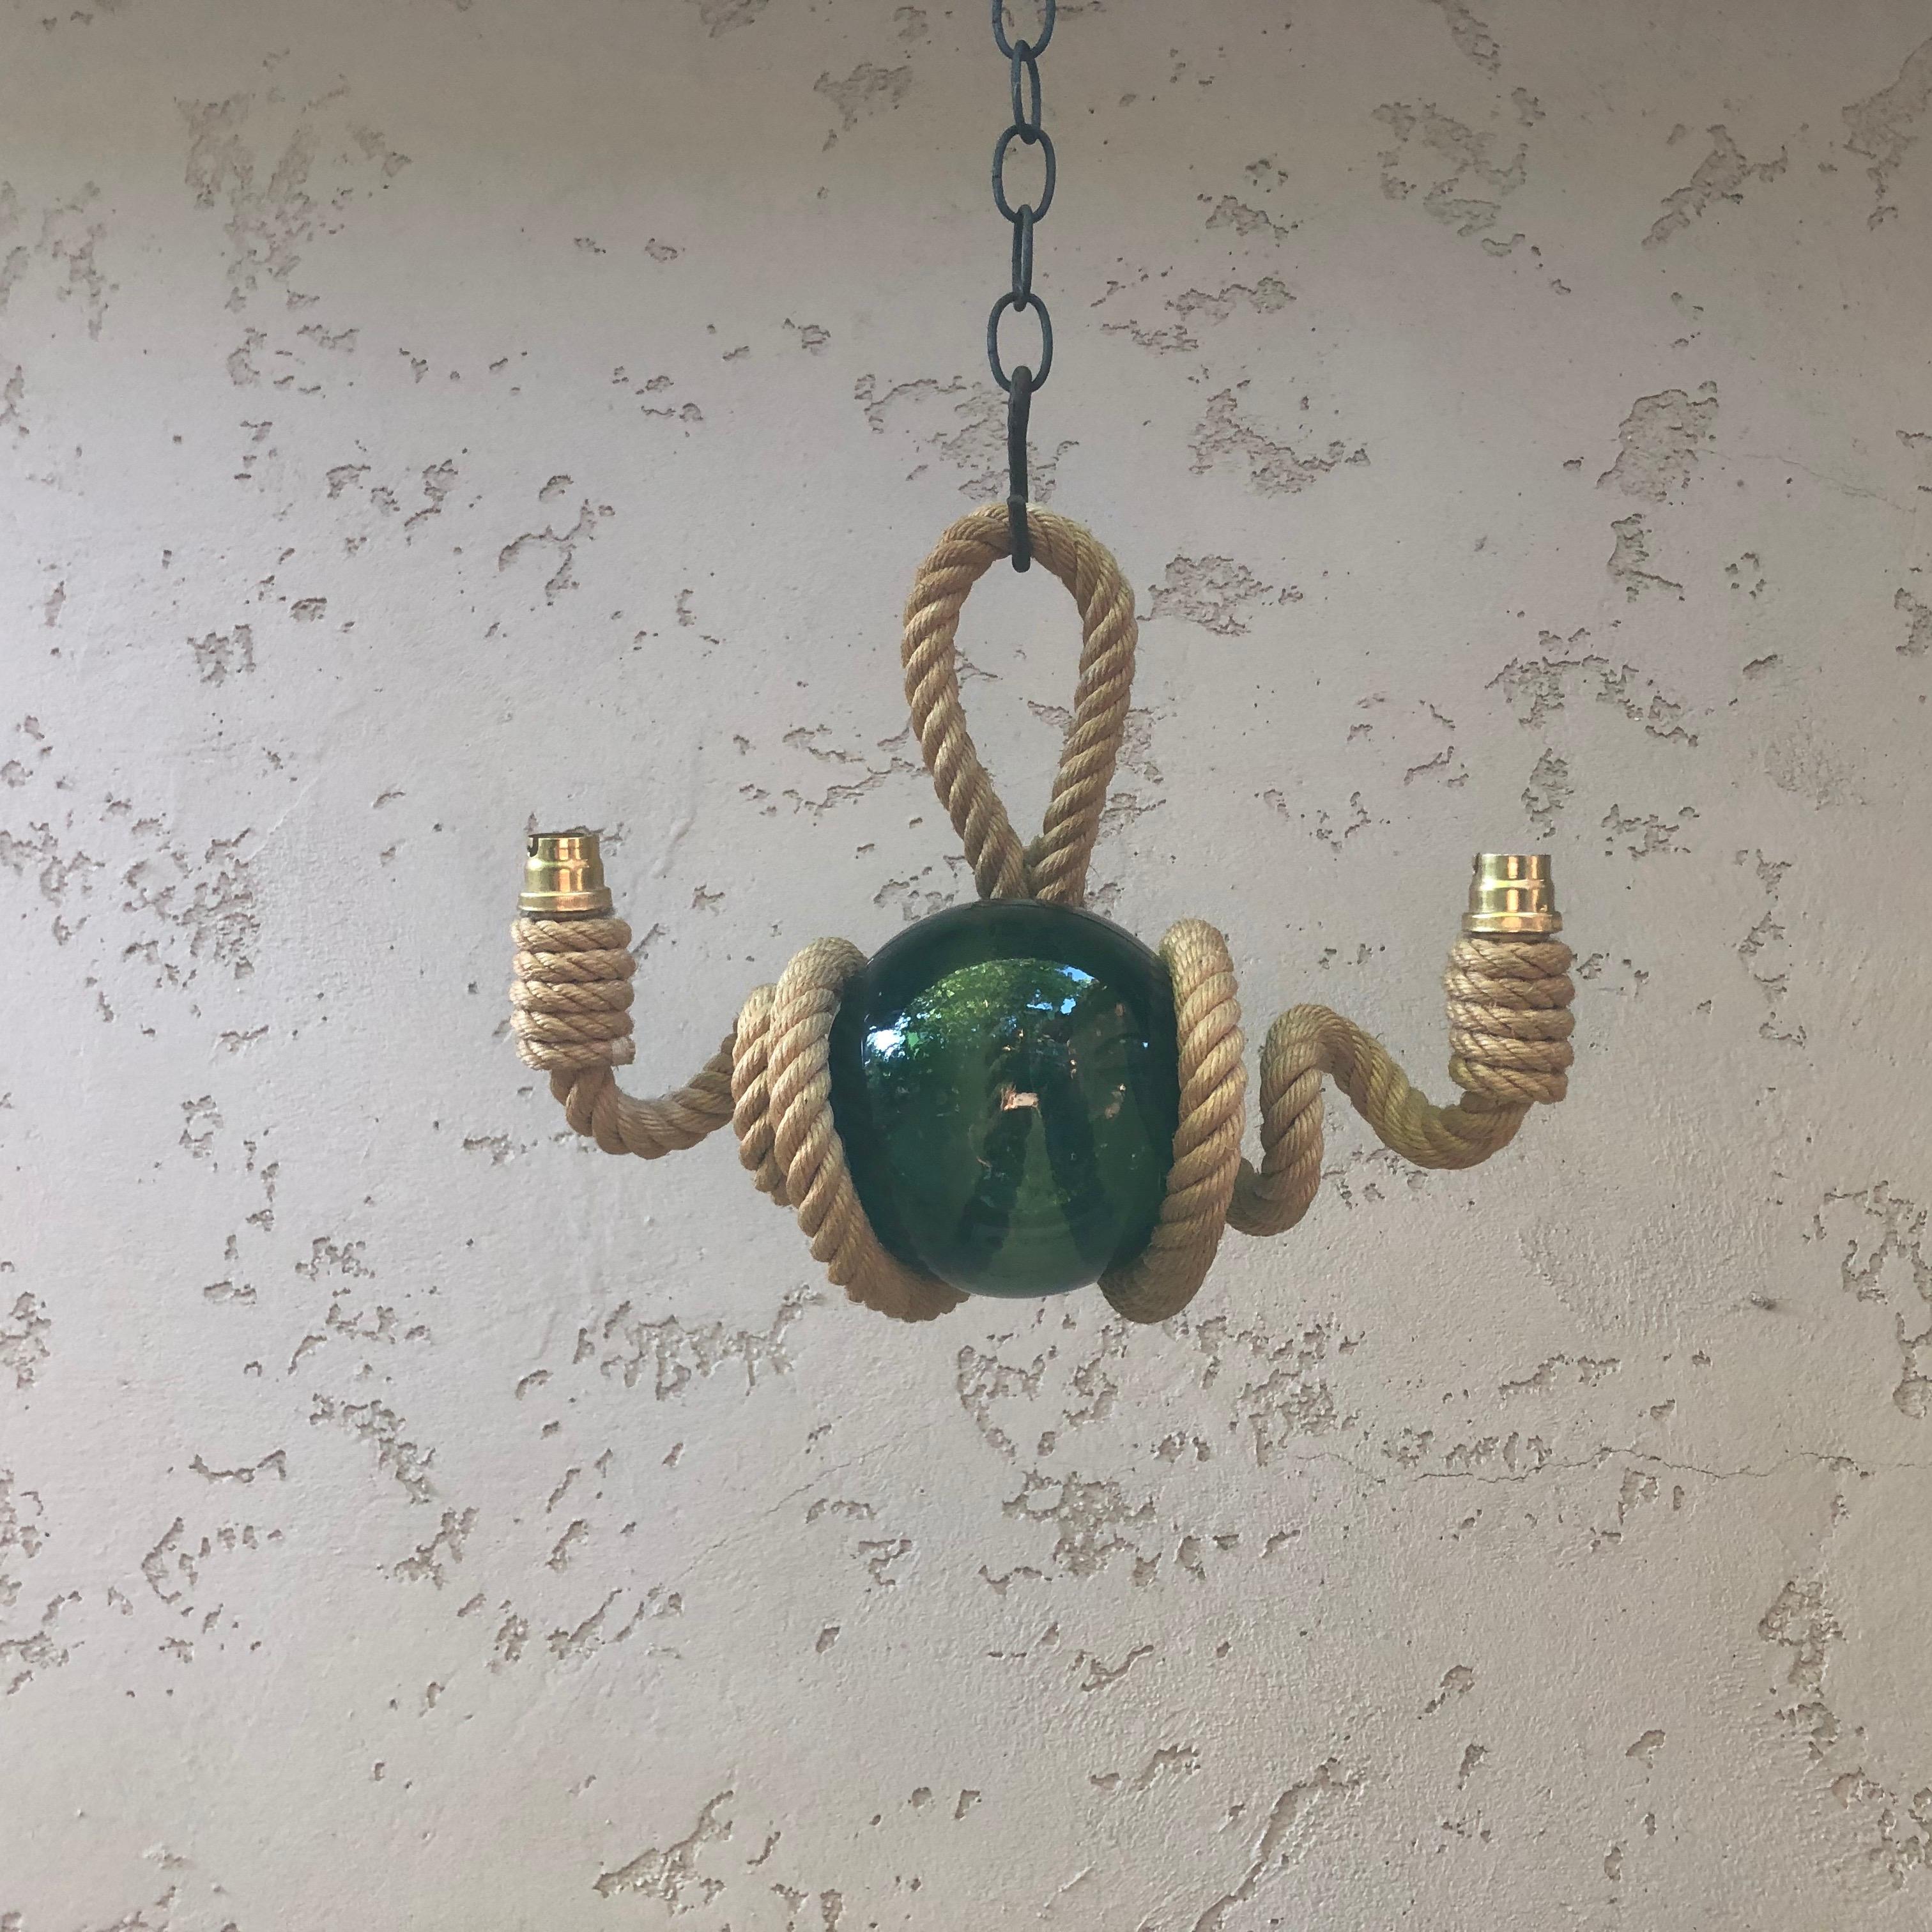 Rare twisted rope sconce Audoux Minet, circa 1960.
With a green glass sphere.
Nautical style.